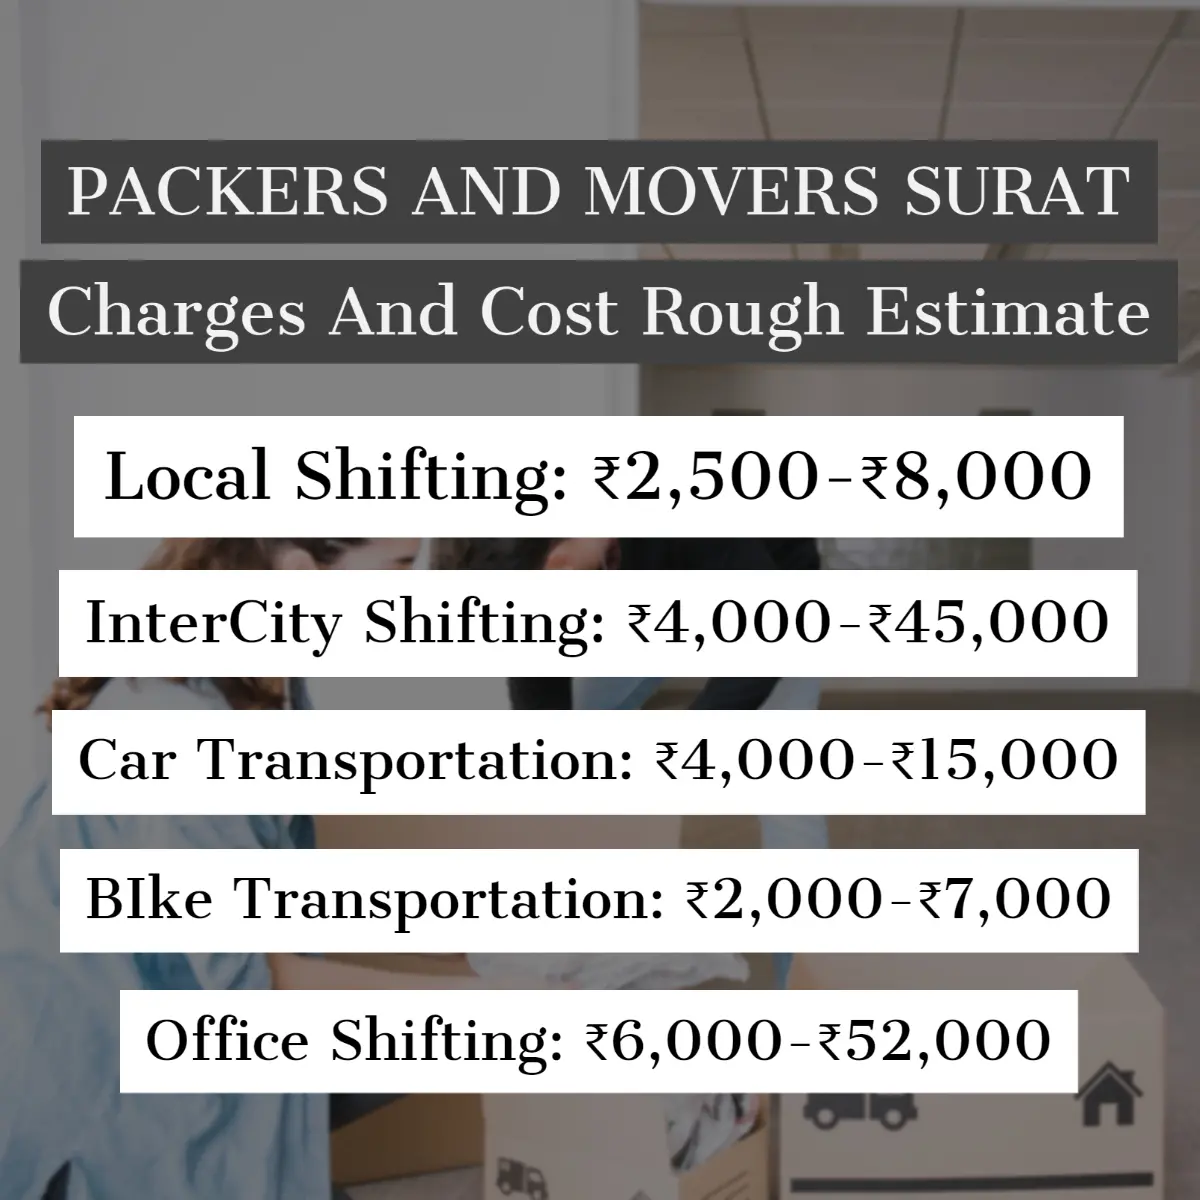 Packers and Movers Surat Charges